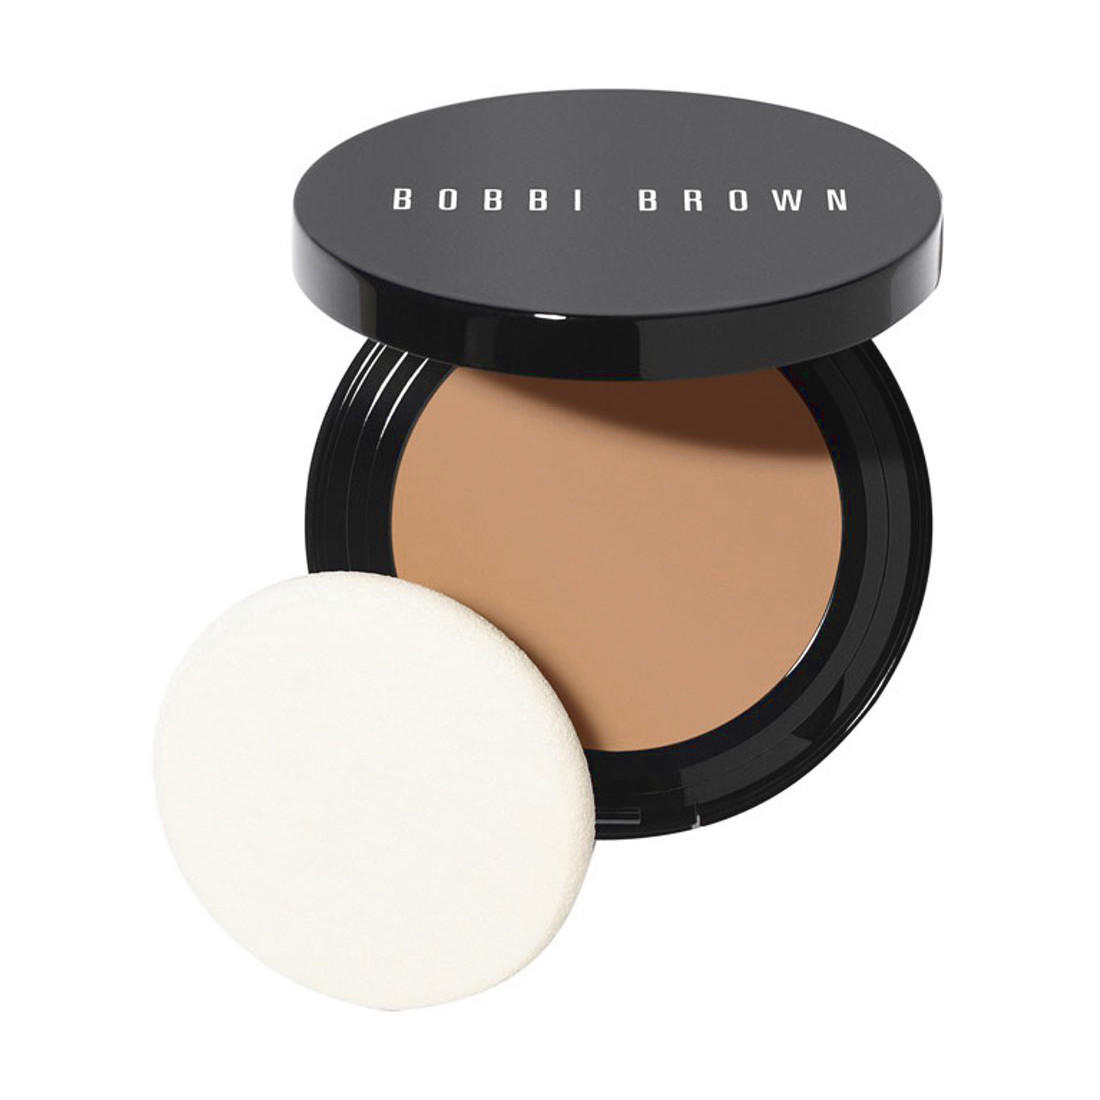 Bobbi Brown Oil-Free Even Finish Compact Foundation Cool Beige 3.25